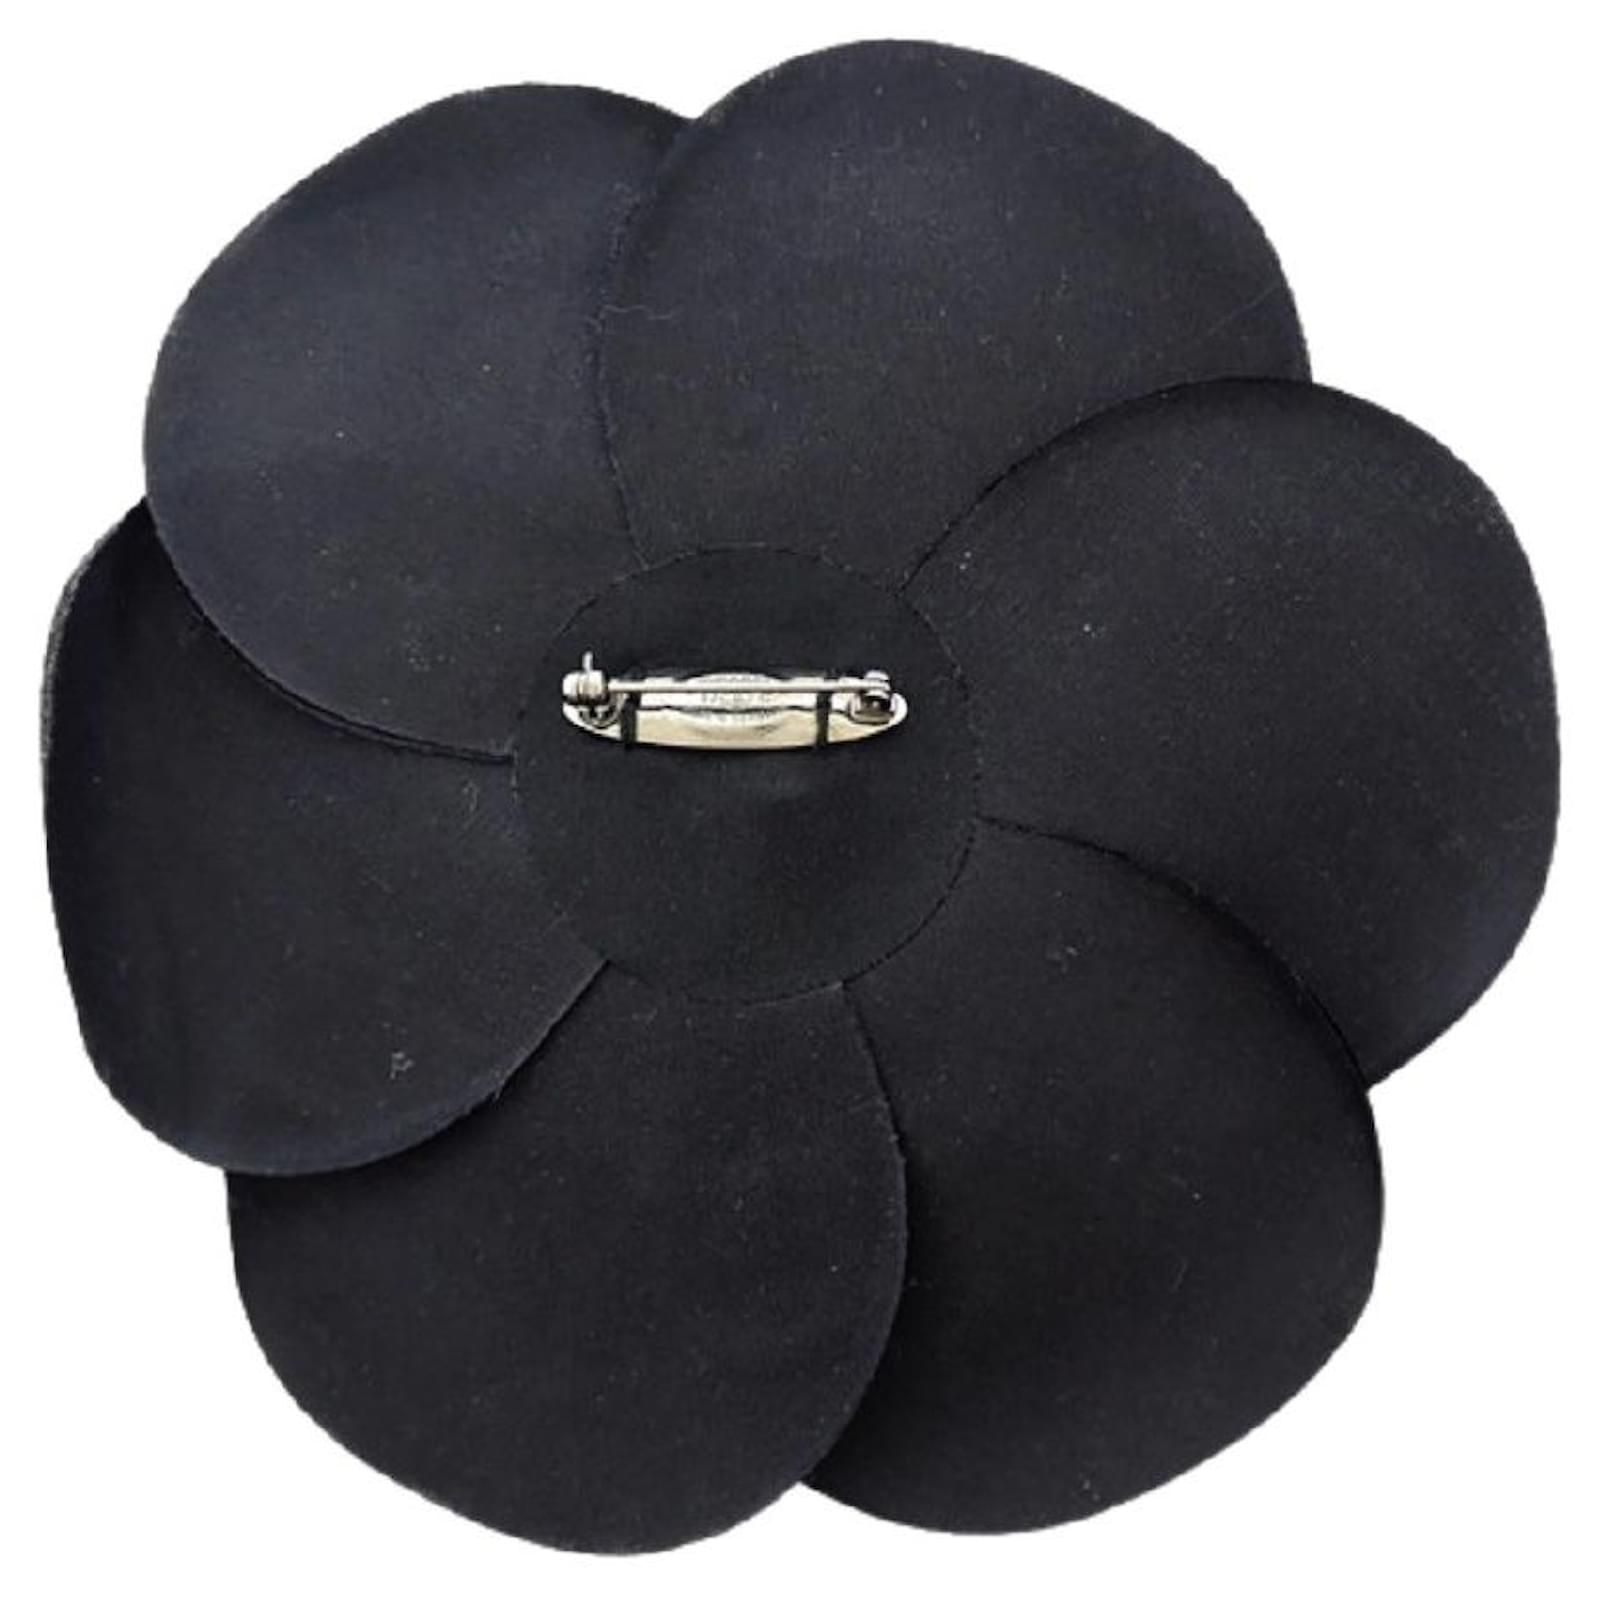 [Used] CHANEL Coco Mark Camellia Corsage Brooch Flower Flower Fashion  Accessories Fabric Black